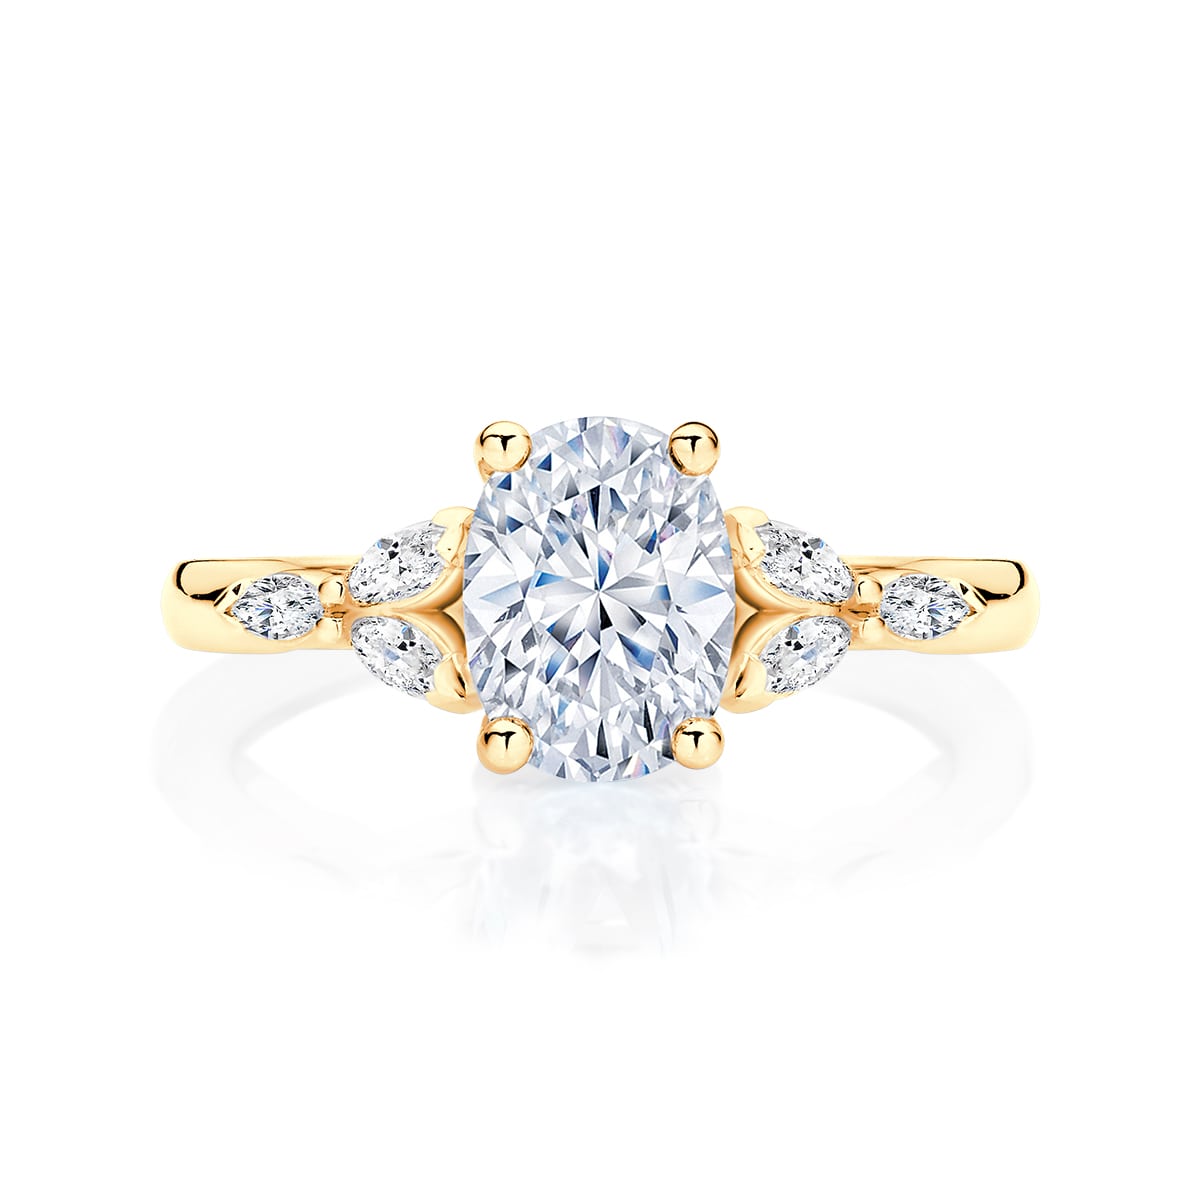 Amalfi Yellow Gold Oval Diamond Engagement Ring with Side Stones